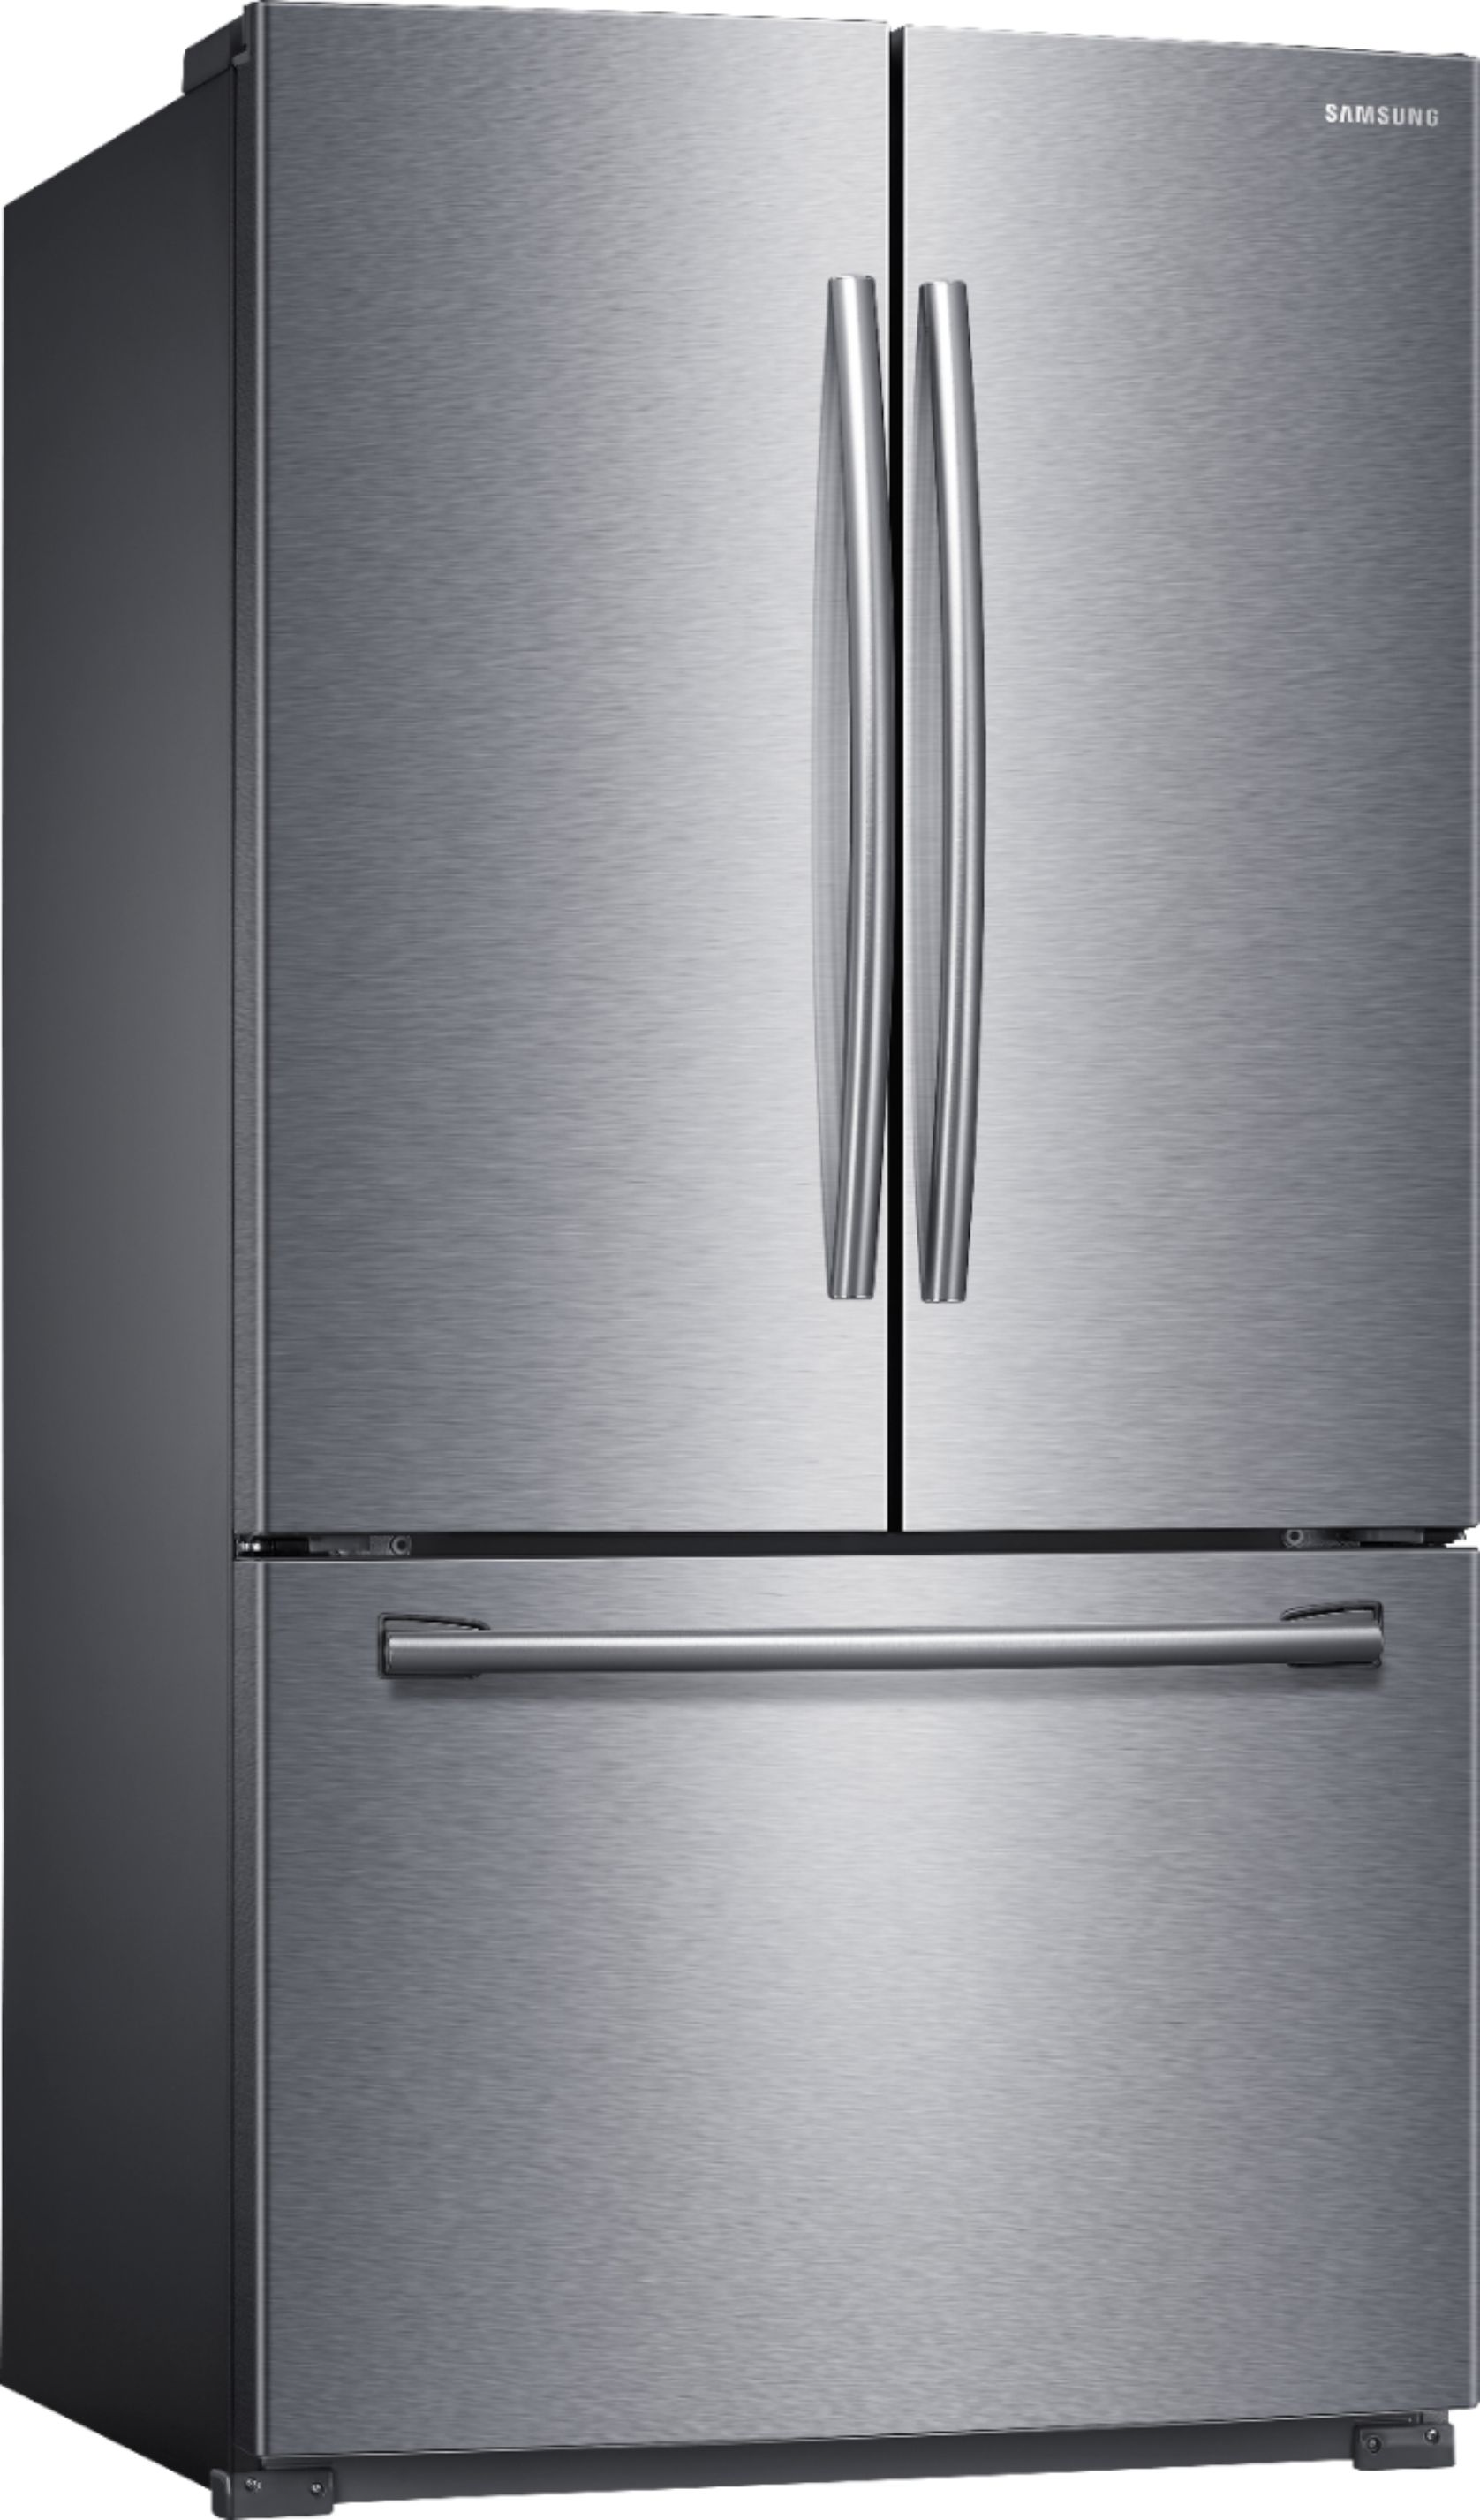 Angle View: Samsung - 25.5 Cu. Ft. French Door Refrigerator with Internal Water Dispenser - Stainless Steel